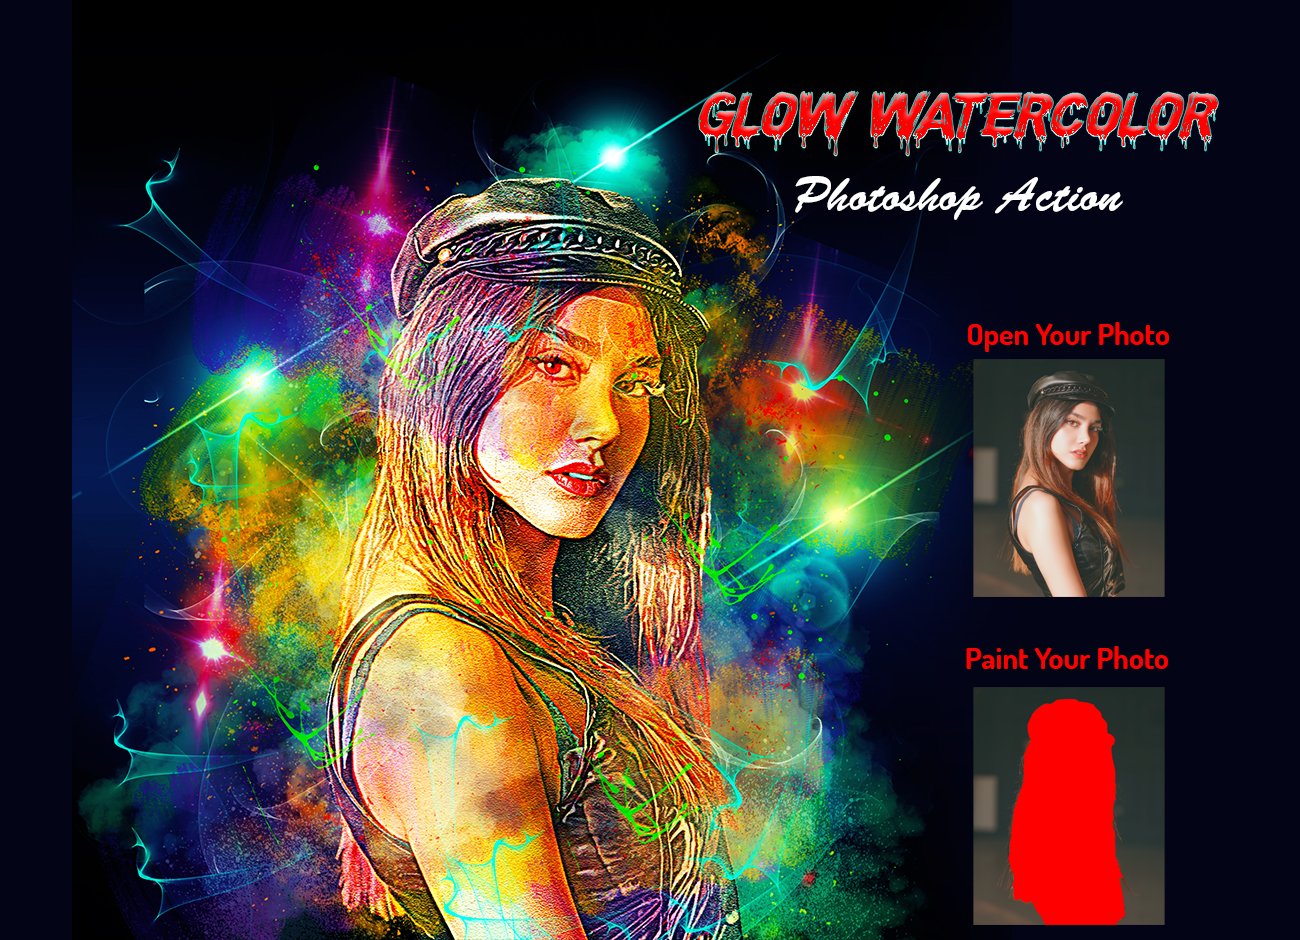 Glow Watercolor Photoshop Actioncover image.